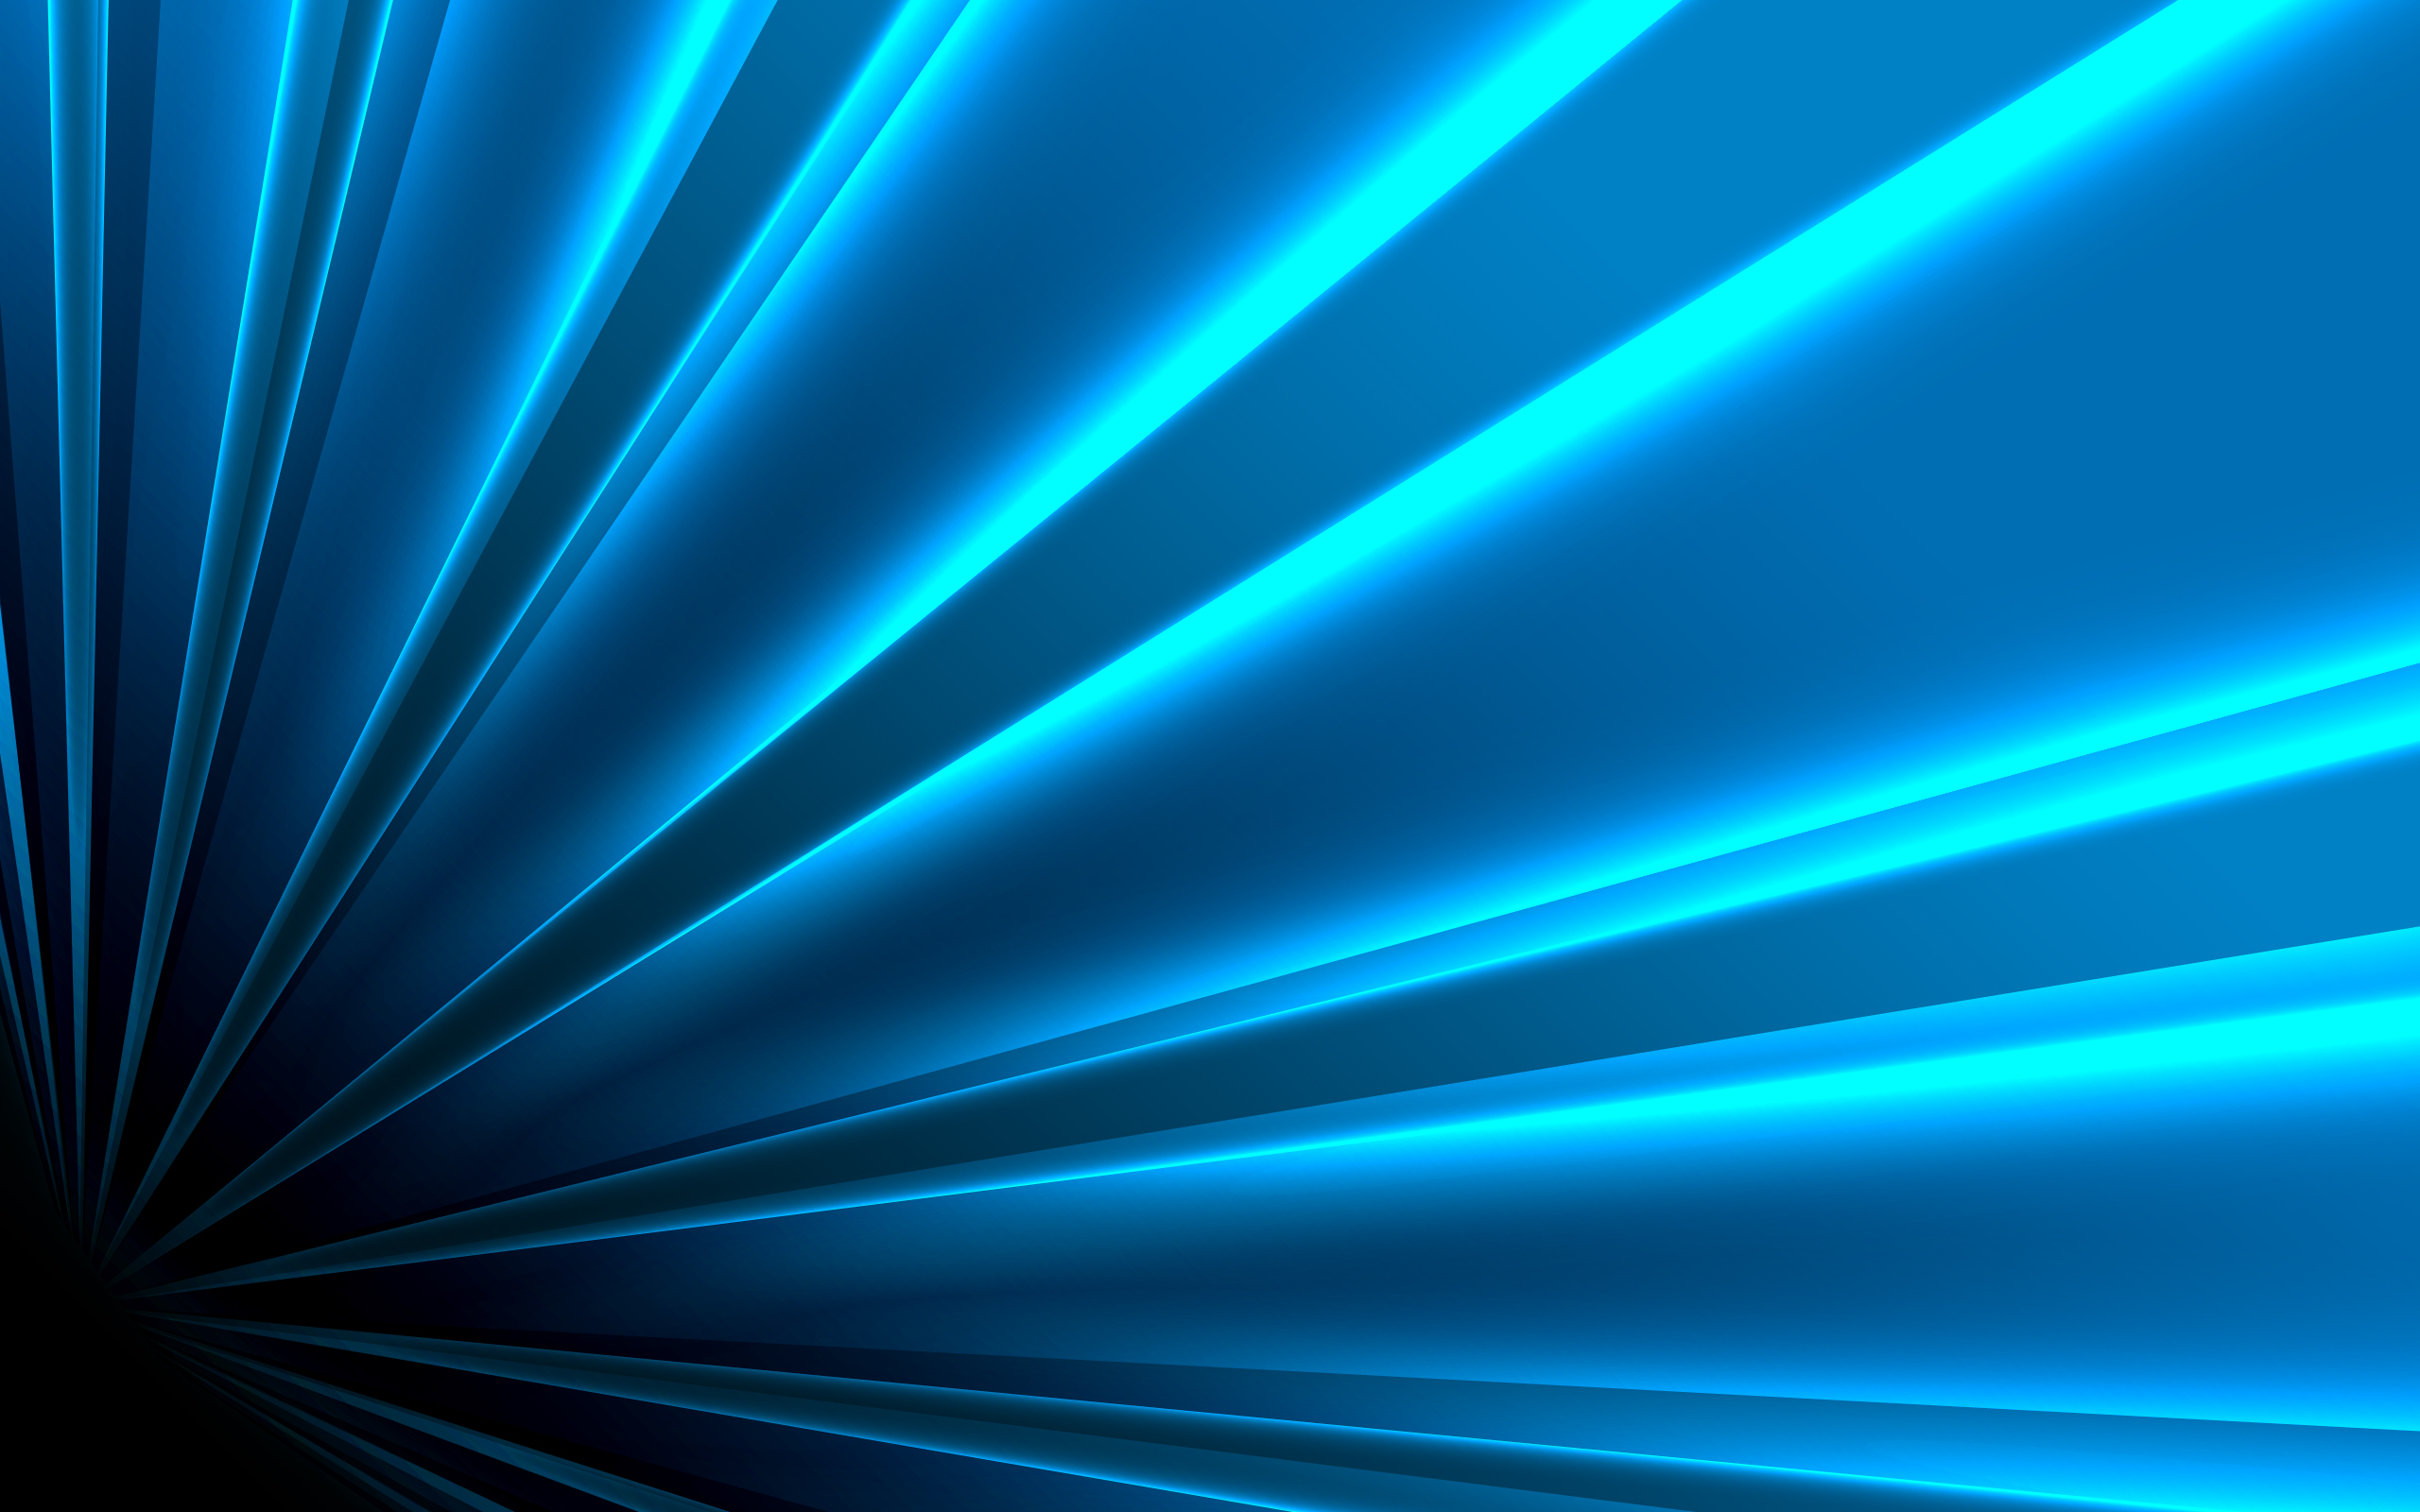  stripes blue light color creative abstract blue lines wallpaper